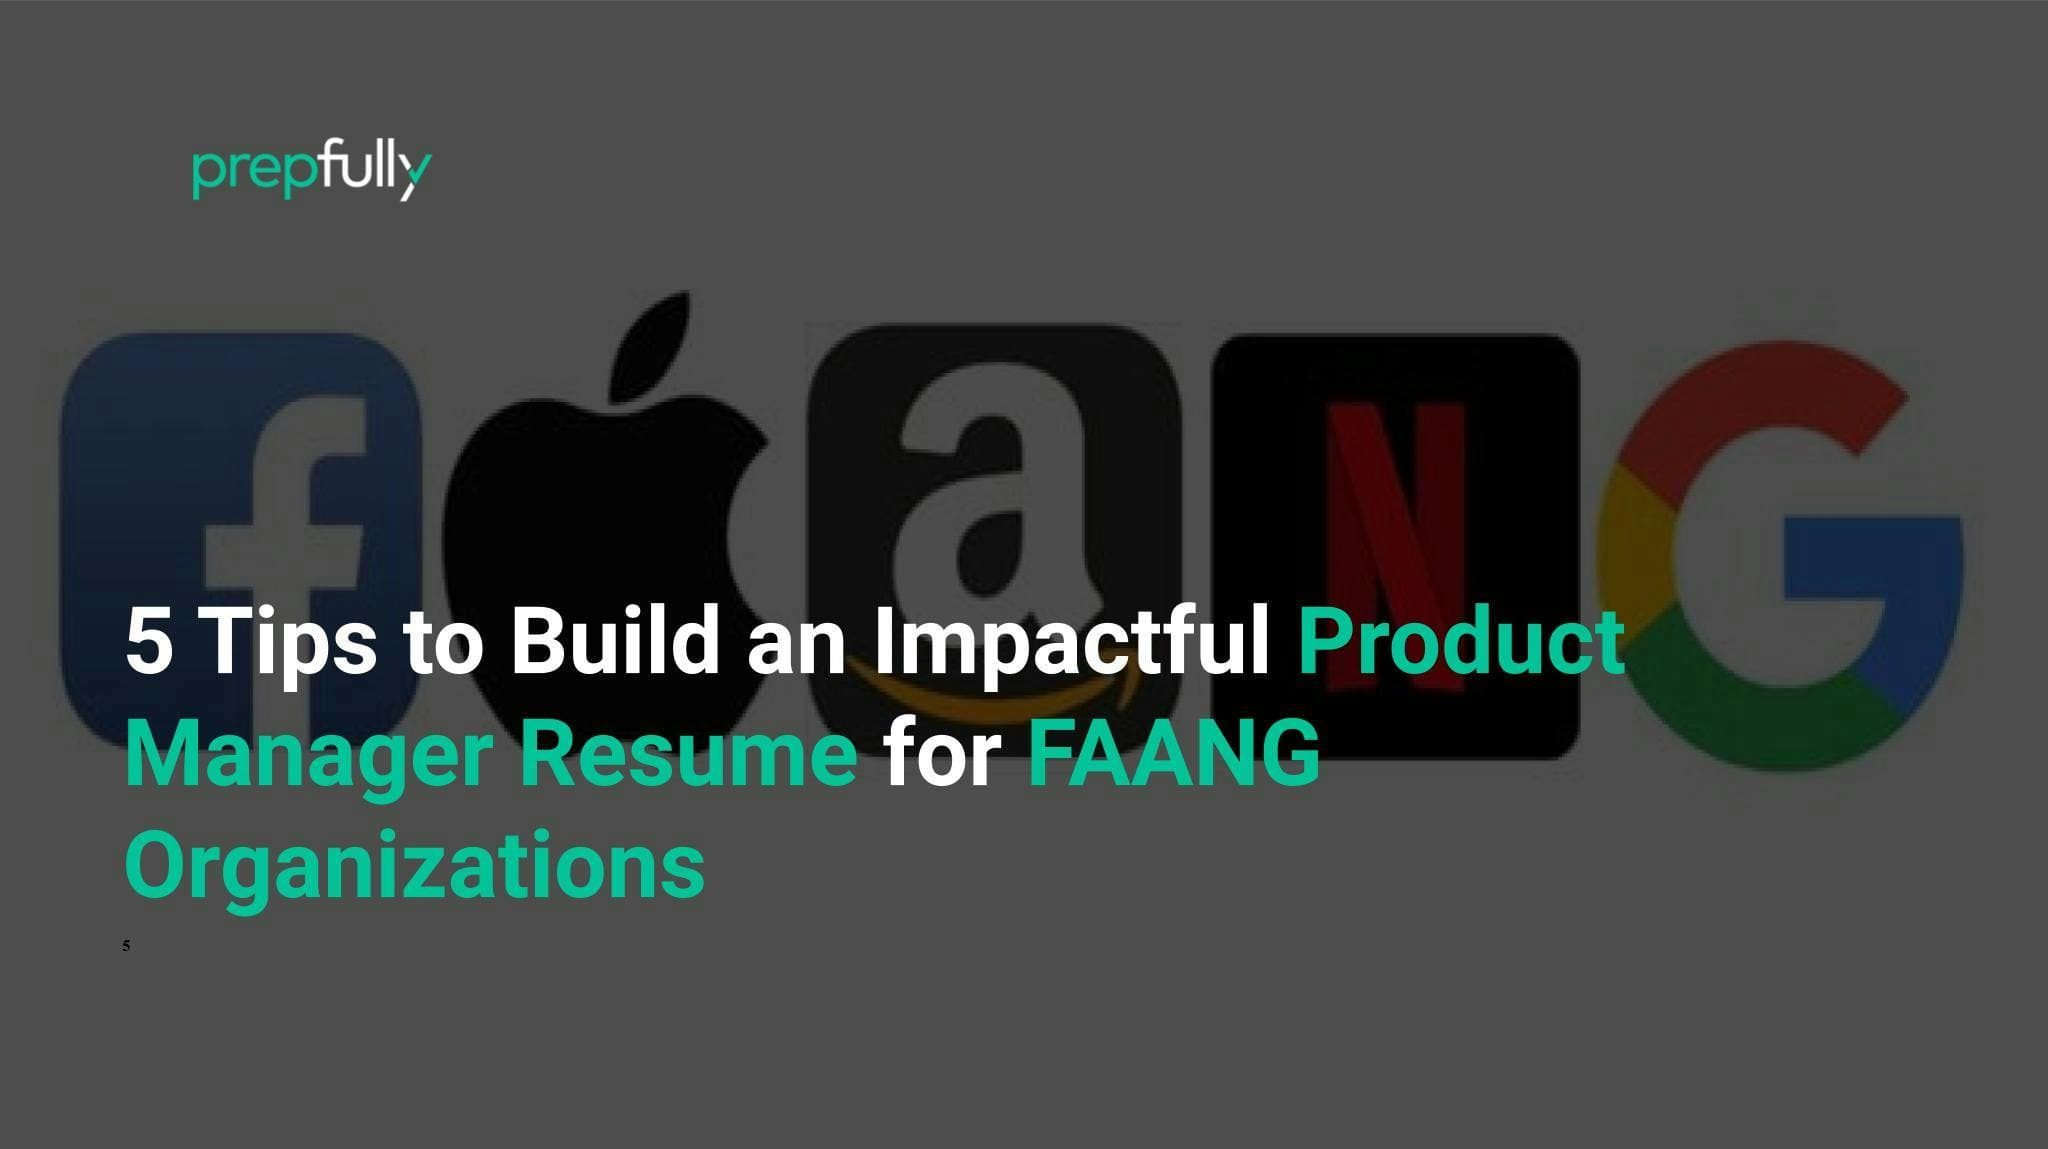 Tips to build product manager resume for FAANG organizations